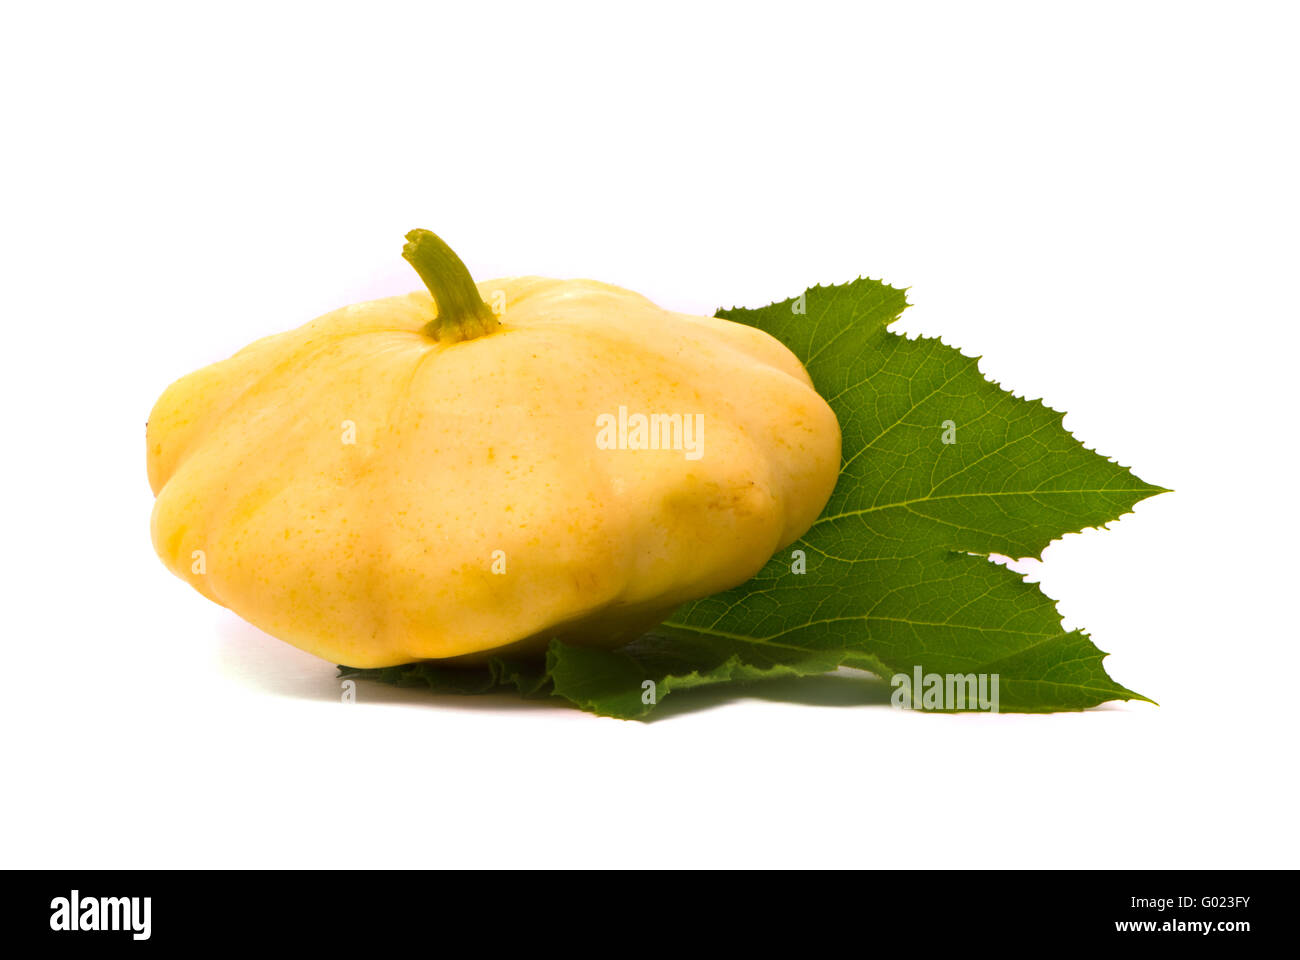 Scallop squash and green leaf on white background Stock Photo